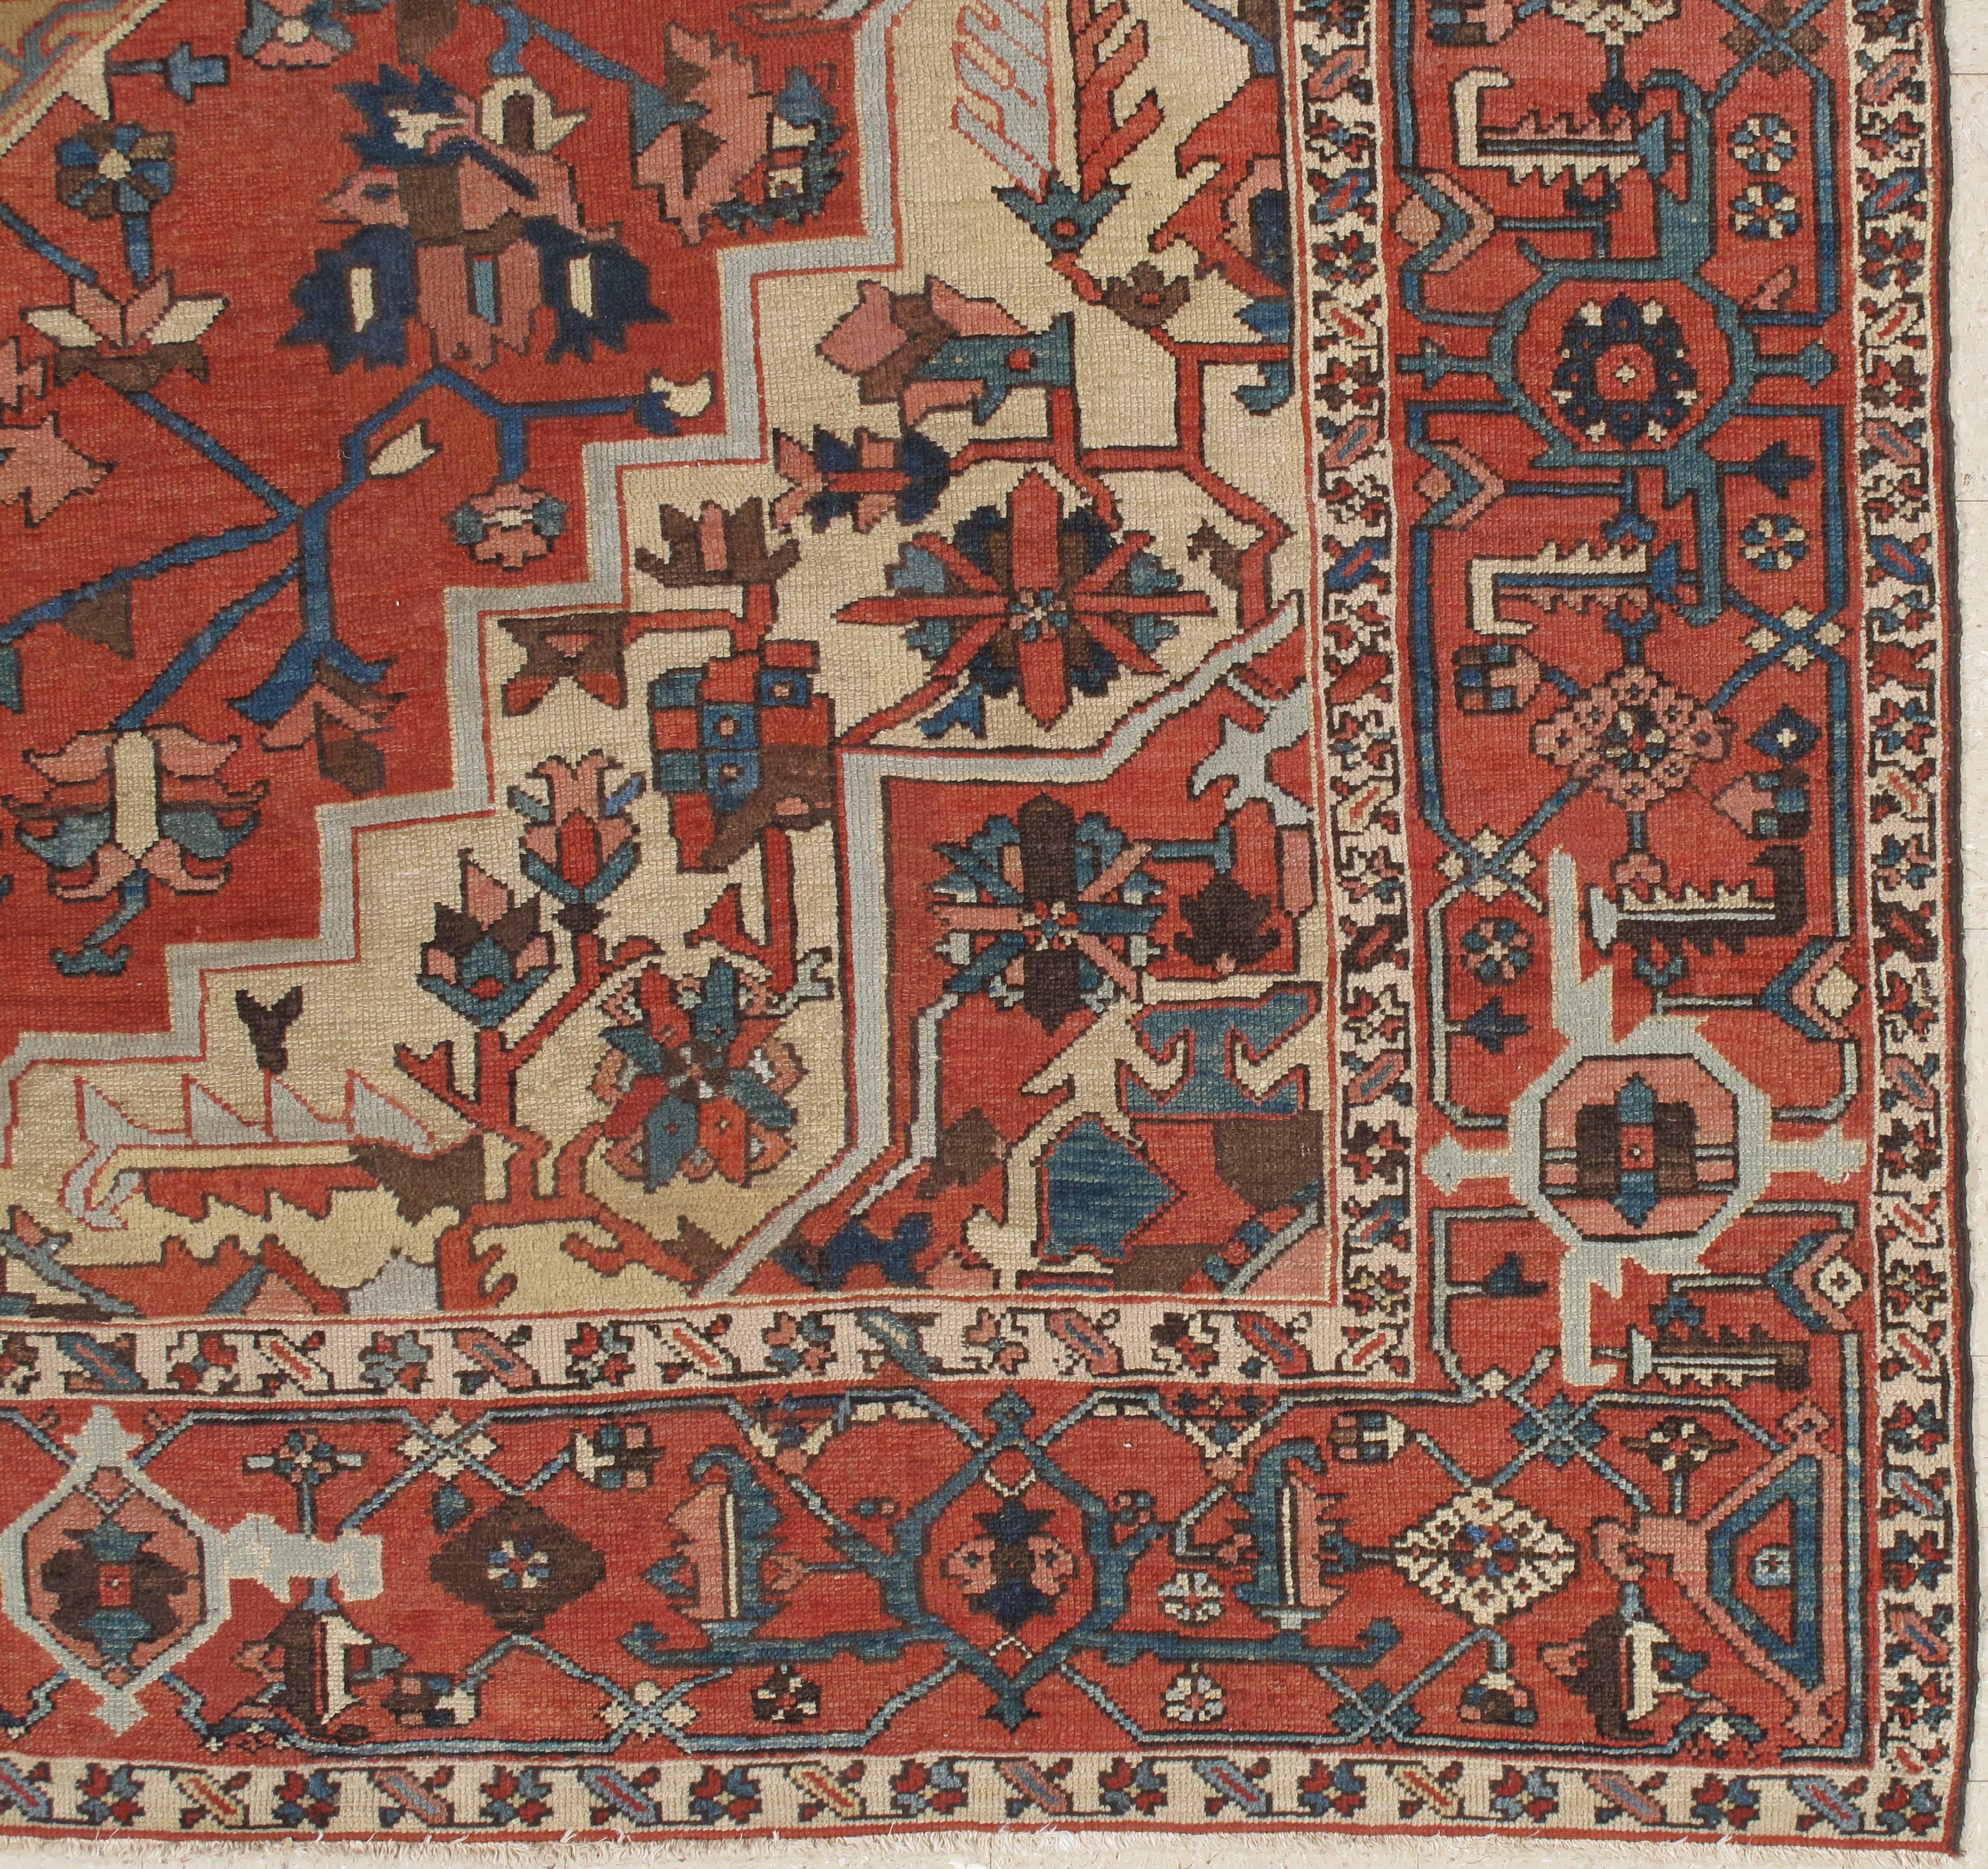 Antique Serapi carpets are one of the most sought after rugs particularly in America and England for many years. Antique Serapi rugs are a major draw particularly in big city America. Serapi carpets were woven on the level of small workshop with